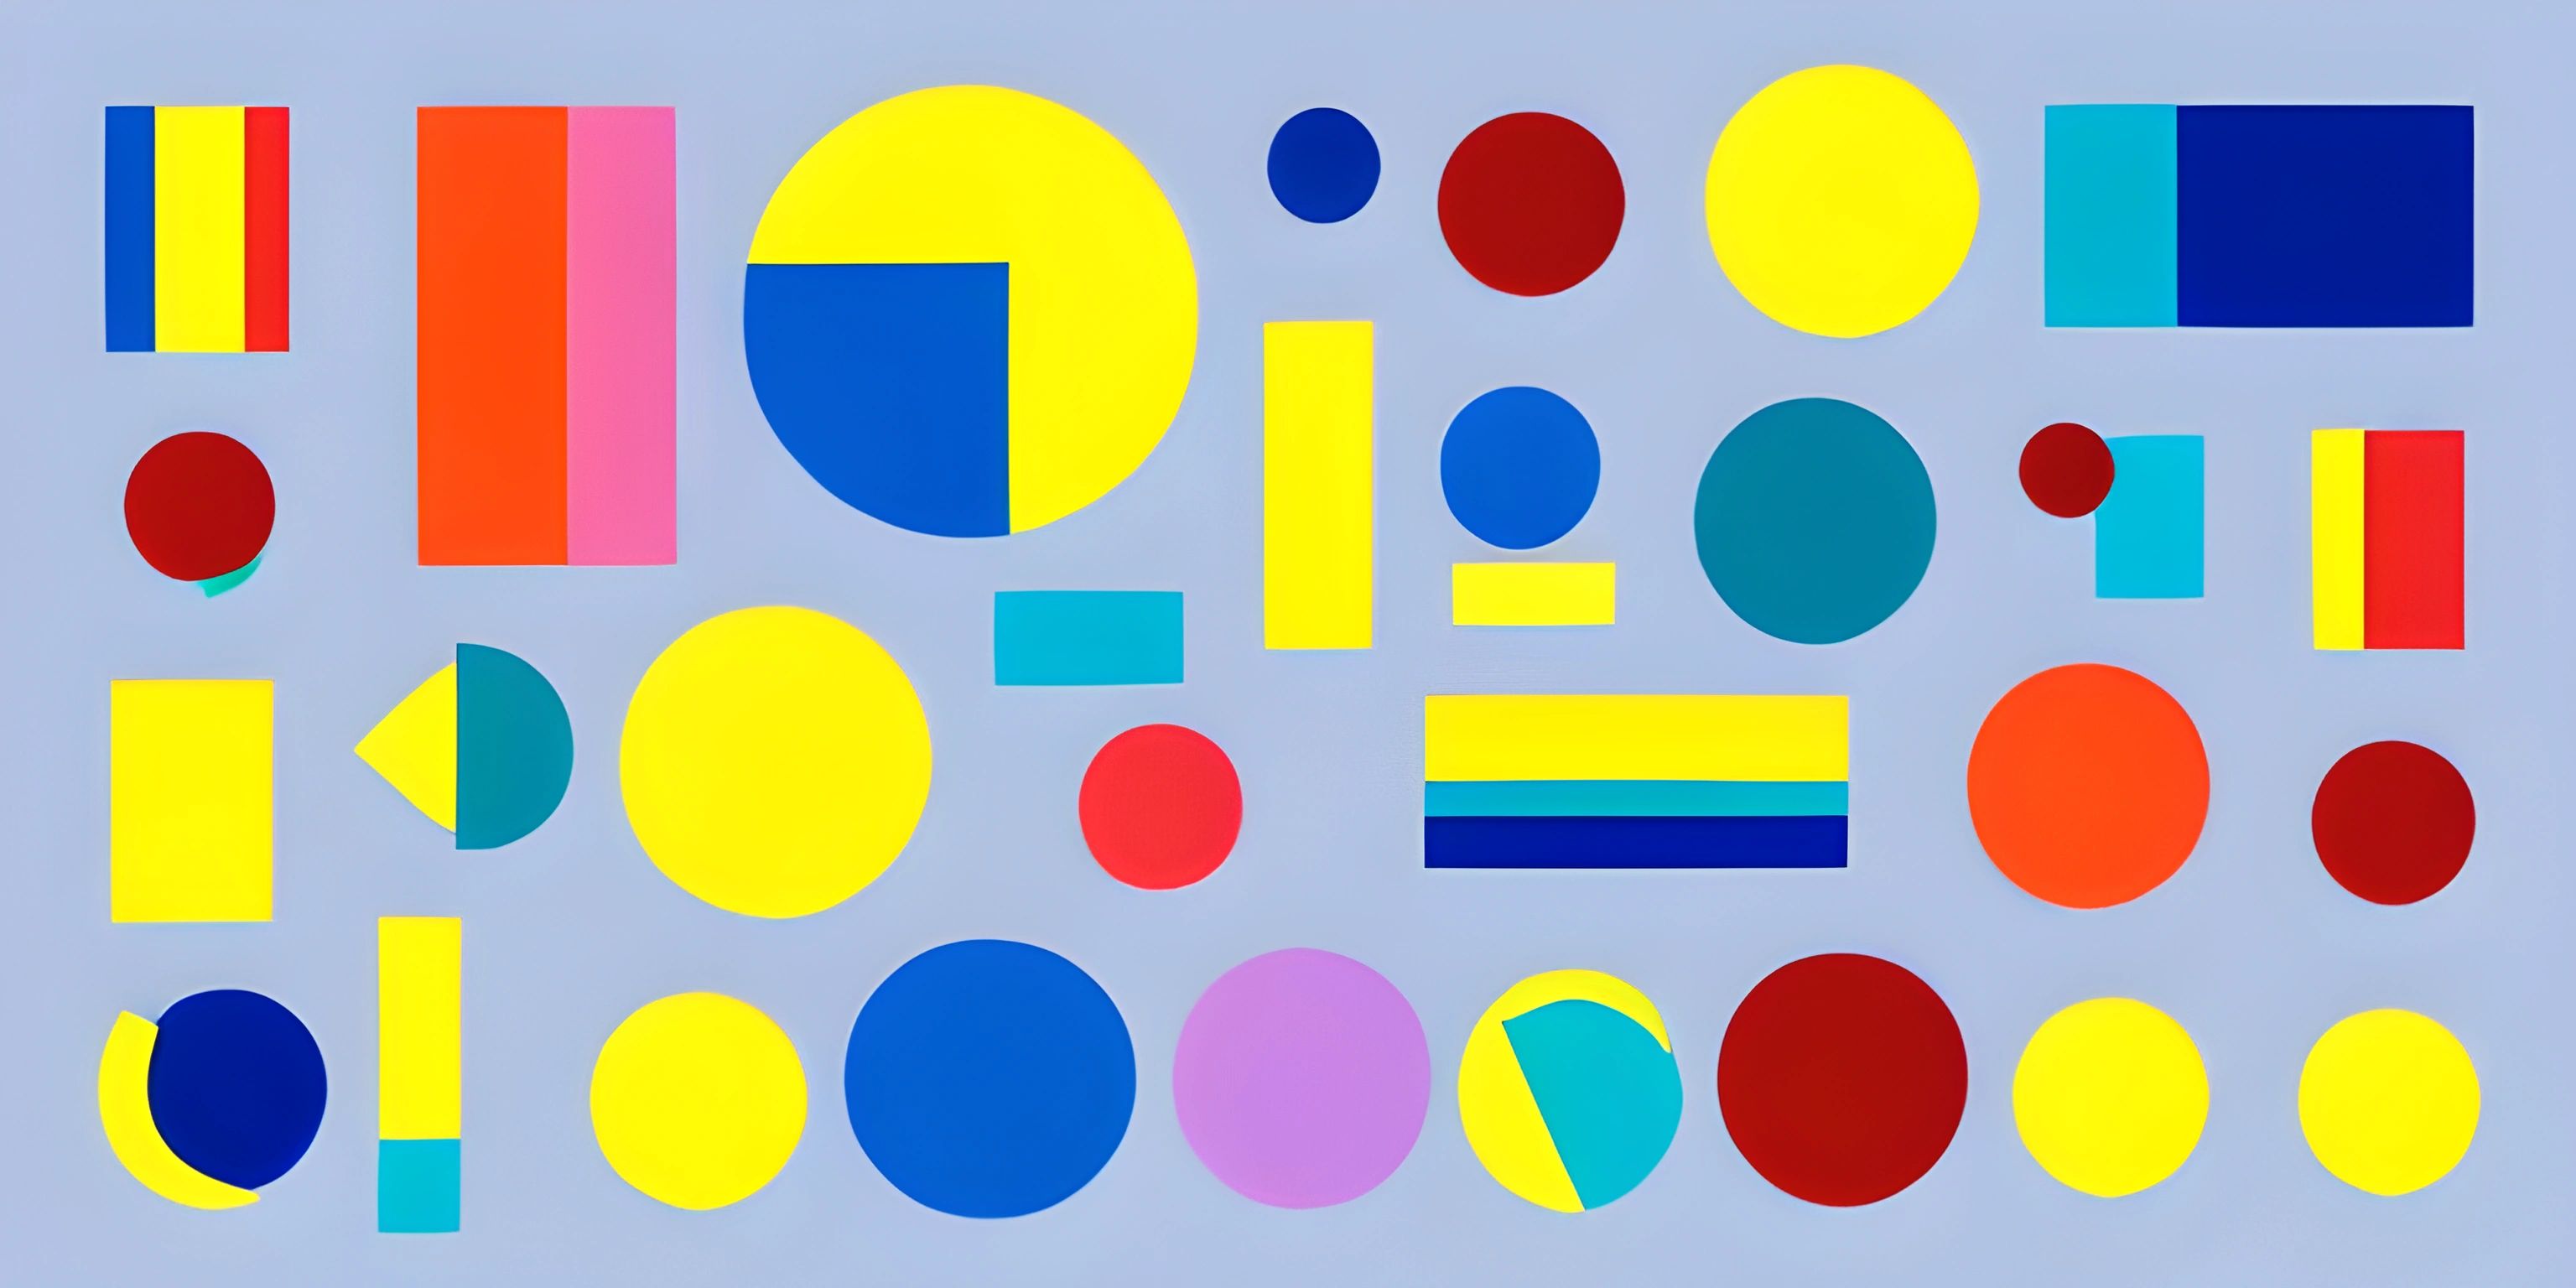 a very large and colorful abstract composition in yellow, blue and red colors with multiple circles on the bottom